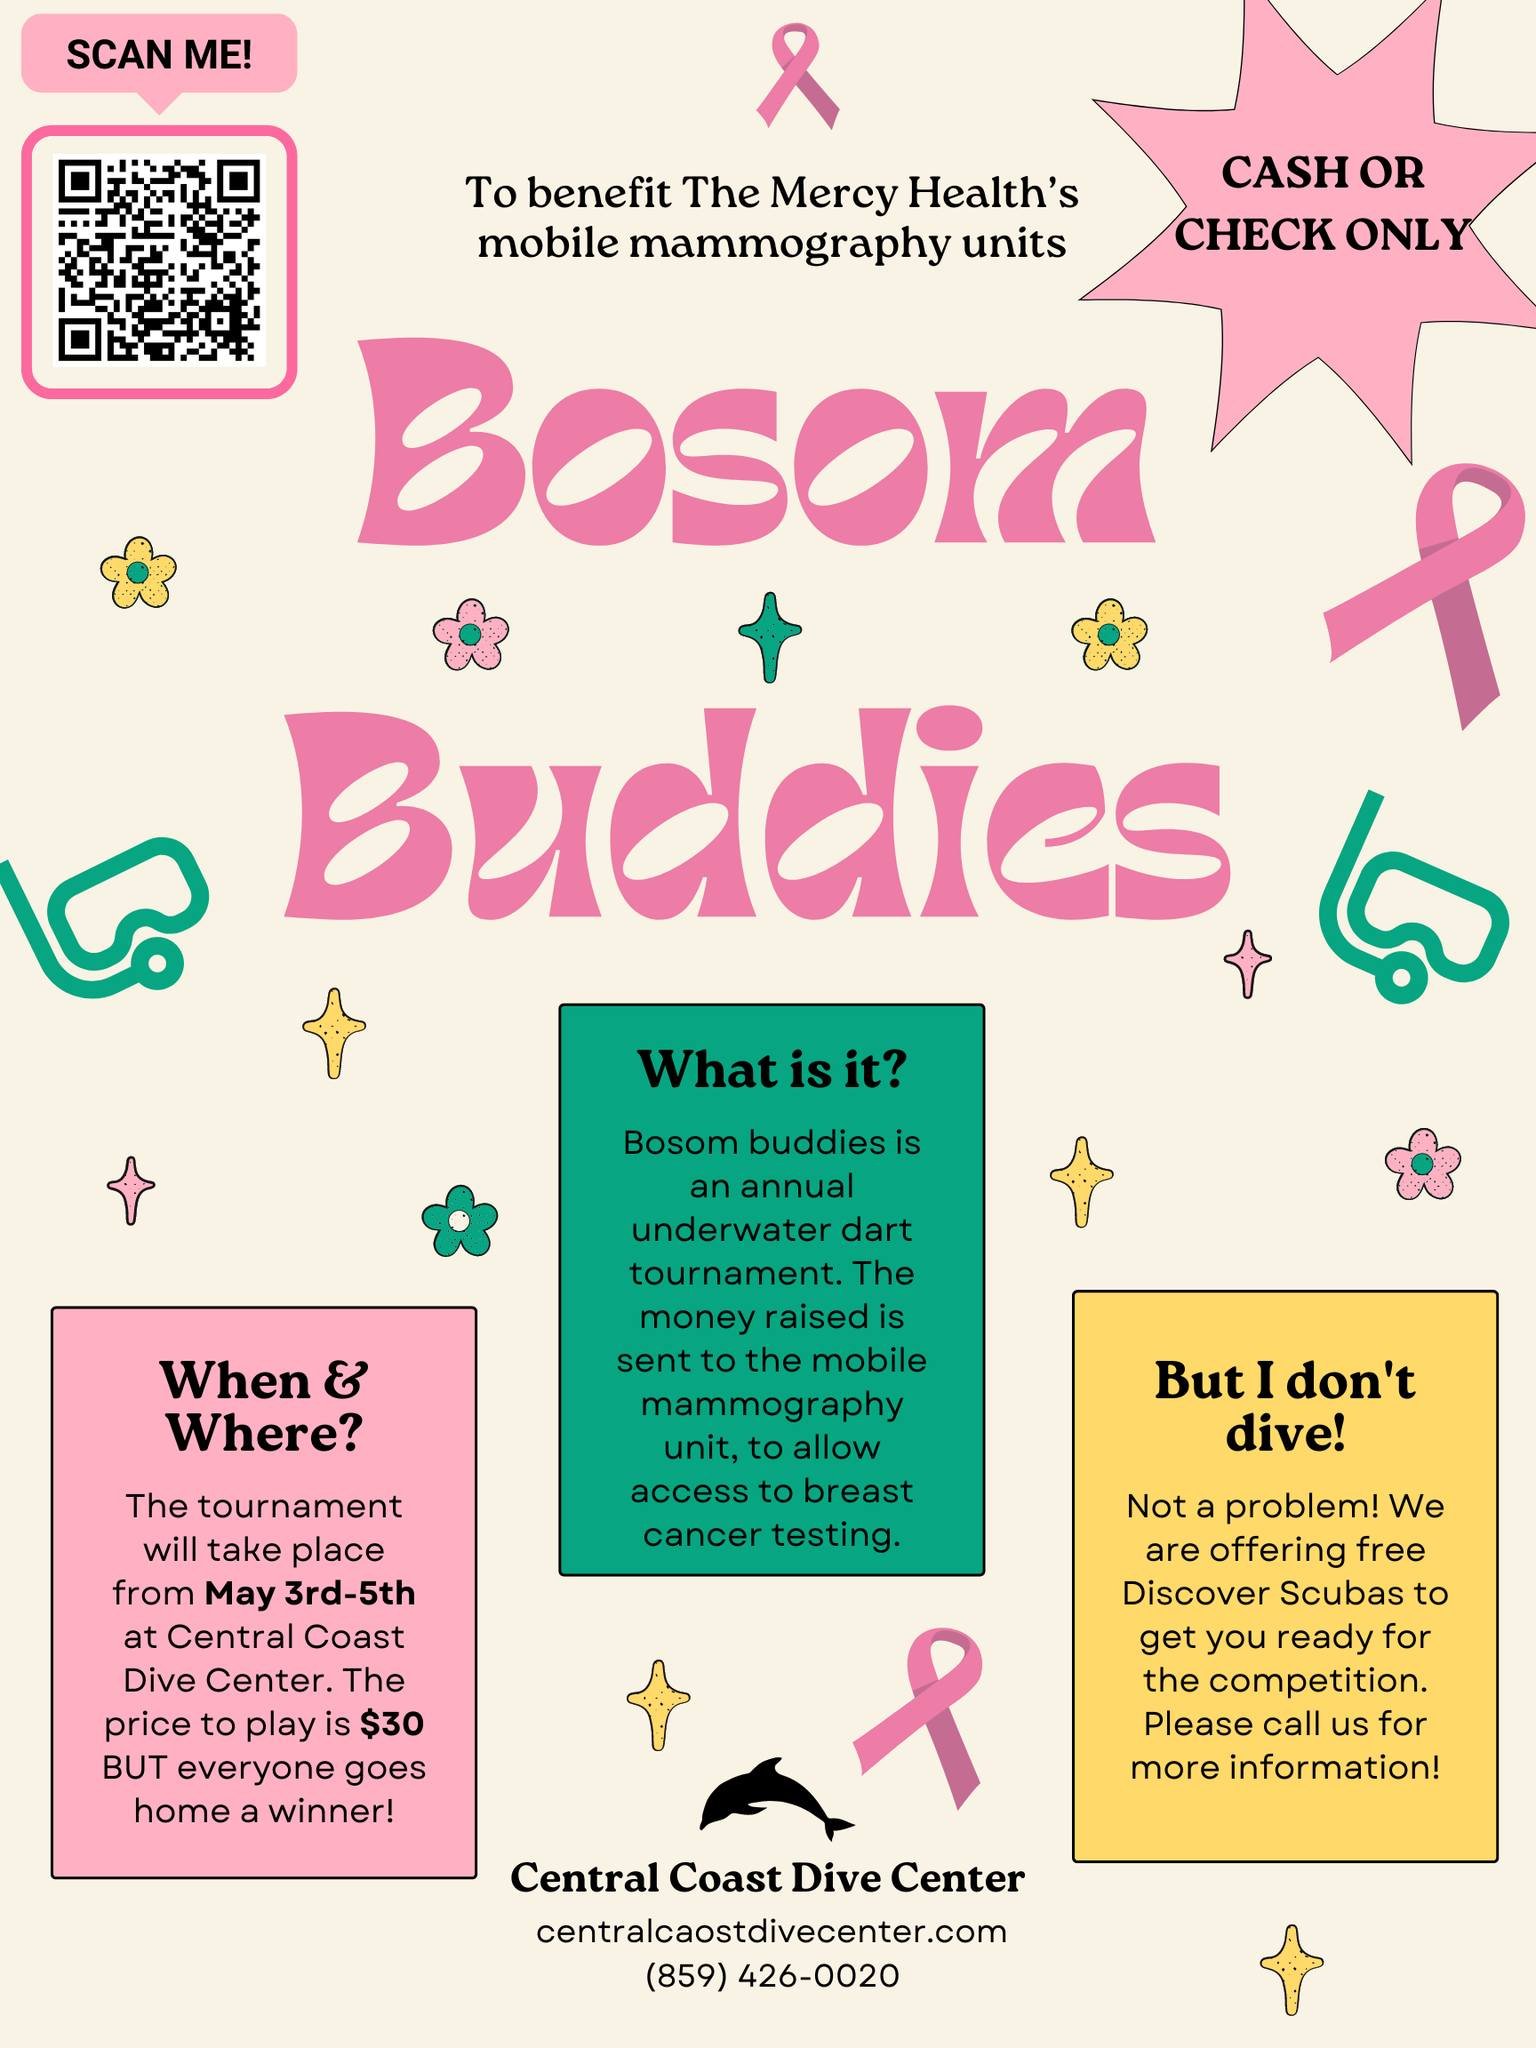 We are just under a week away from Bosom Buddies! We still have some openings but they are filling up fast! Don't forget to sign up! Not only are you playing for great prizes, but you are also helping a local hospital with allowing access to life sav